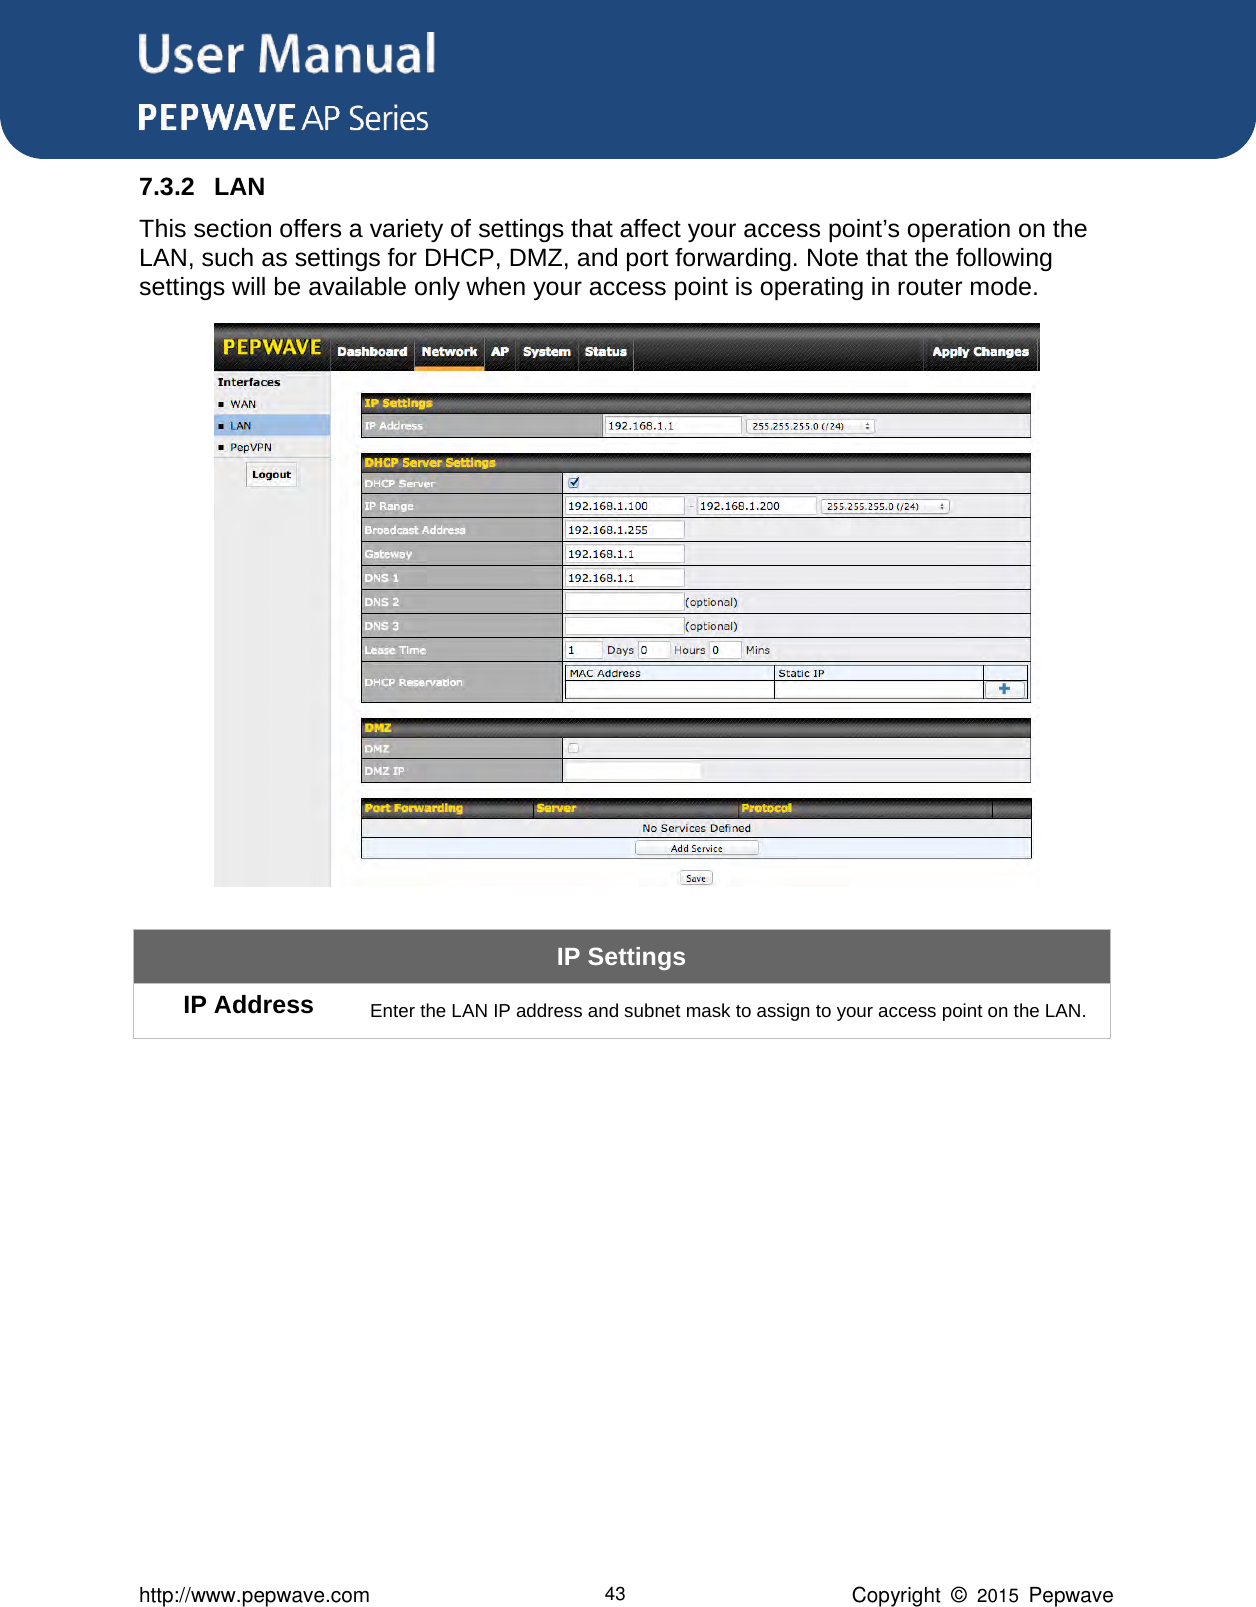 User Manual      http://www.pepwave.com 43 Copyright  ©  2015  Pepwave 7.3.2 LAN This section offers a variety of settings that affect your access point’s operation on the LAN, such as settings for DHCP, DMZ, and port forwarding. Note that the following settings will be available only when your access point is operating in router mode.  IP Settings IP Address Enter the LAN IP address and subnet mask to assign to your access point on the LAN.            